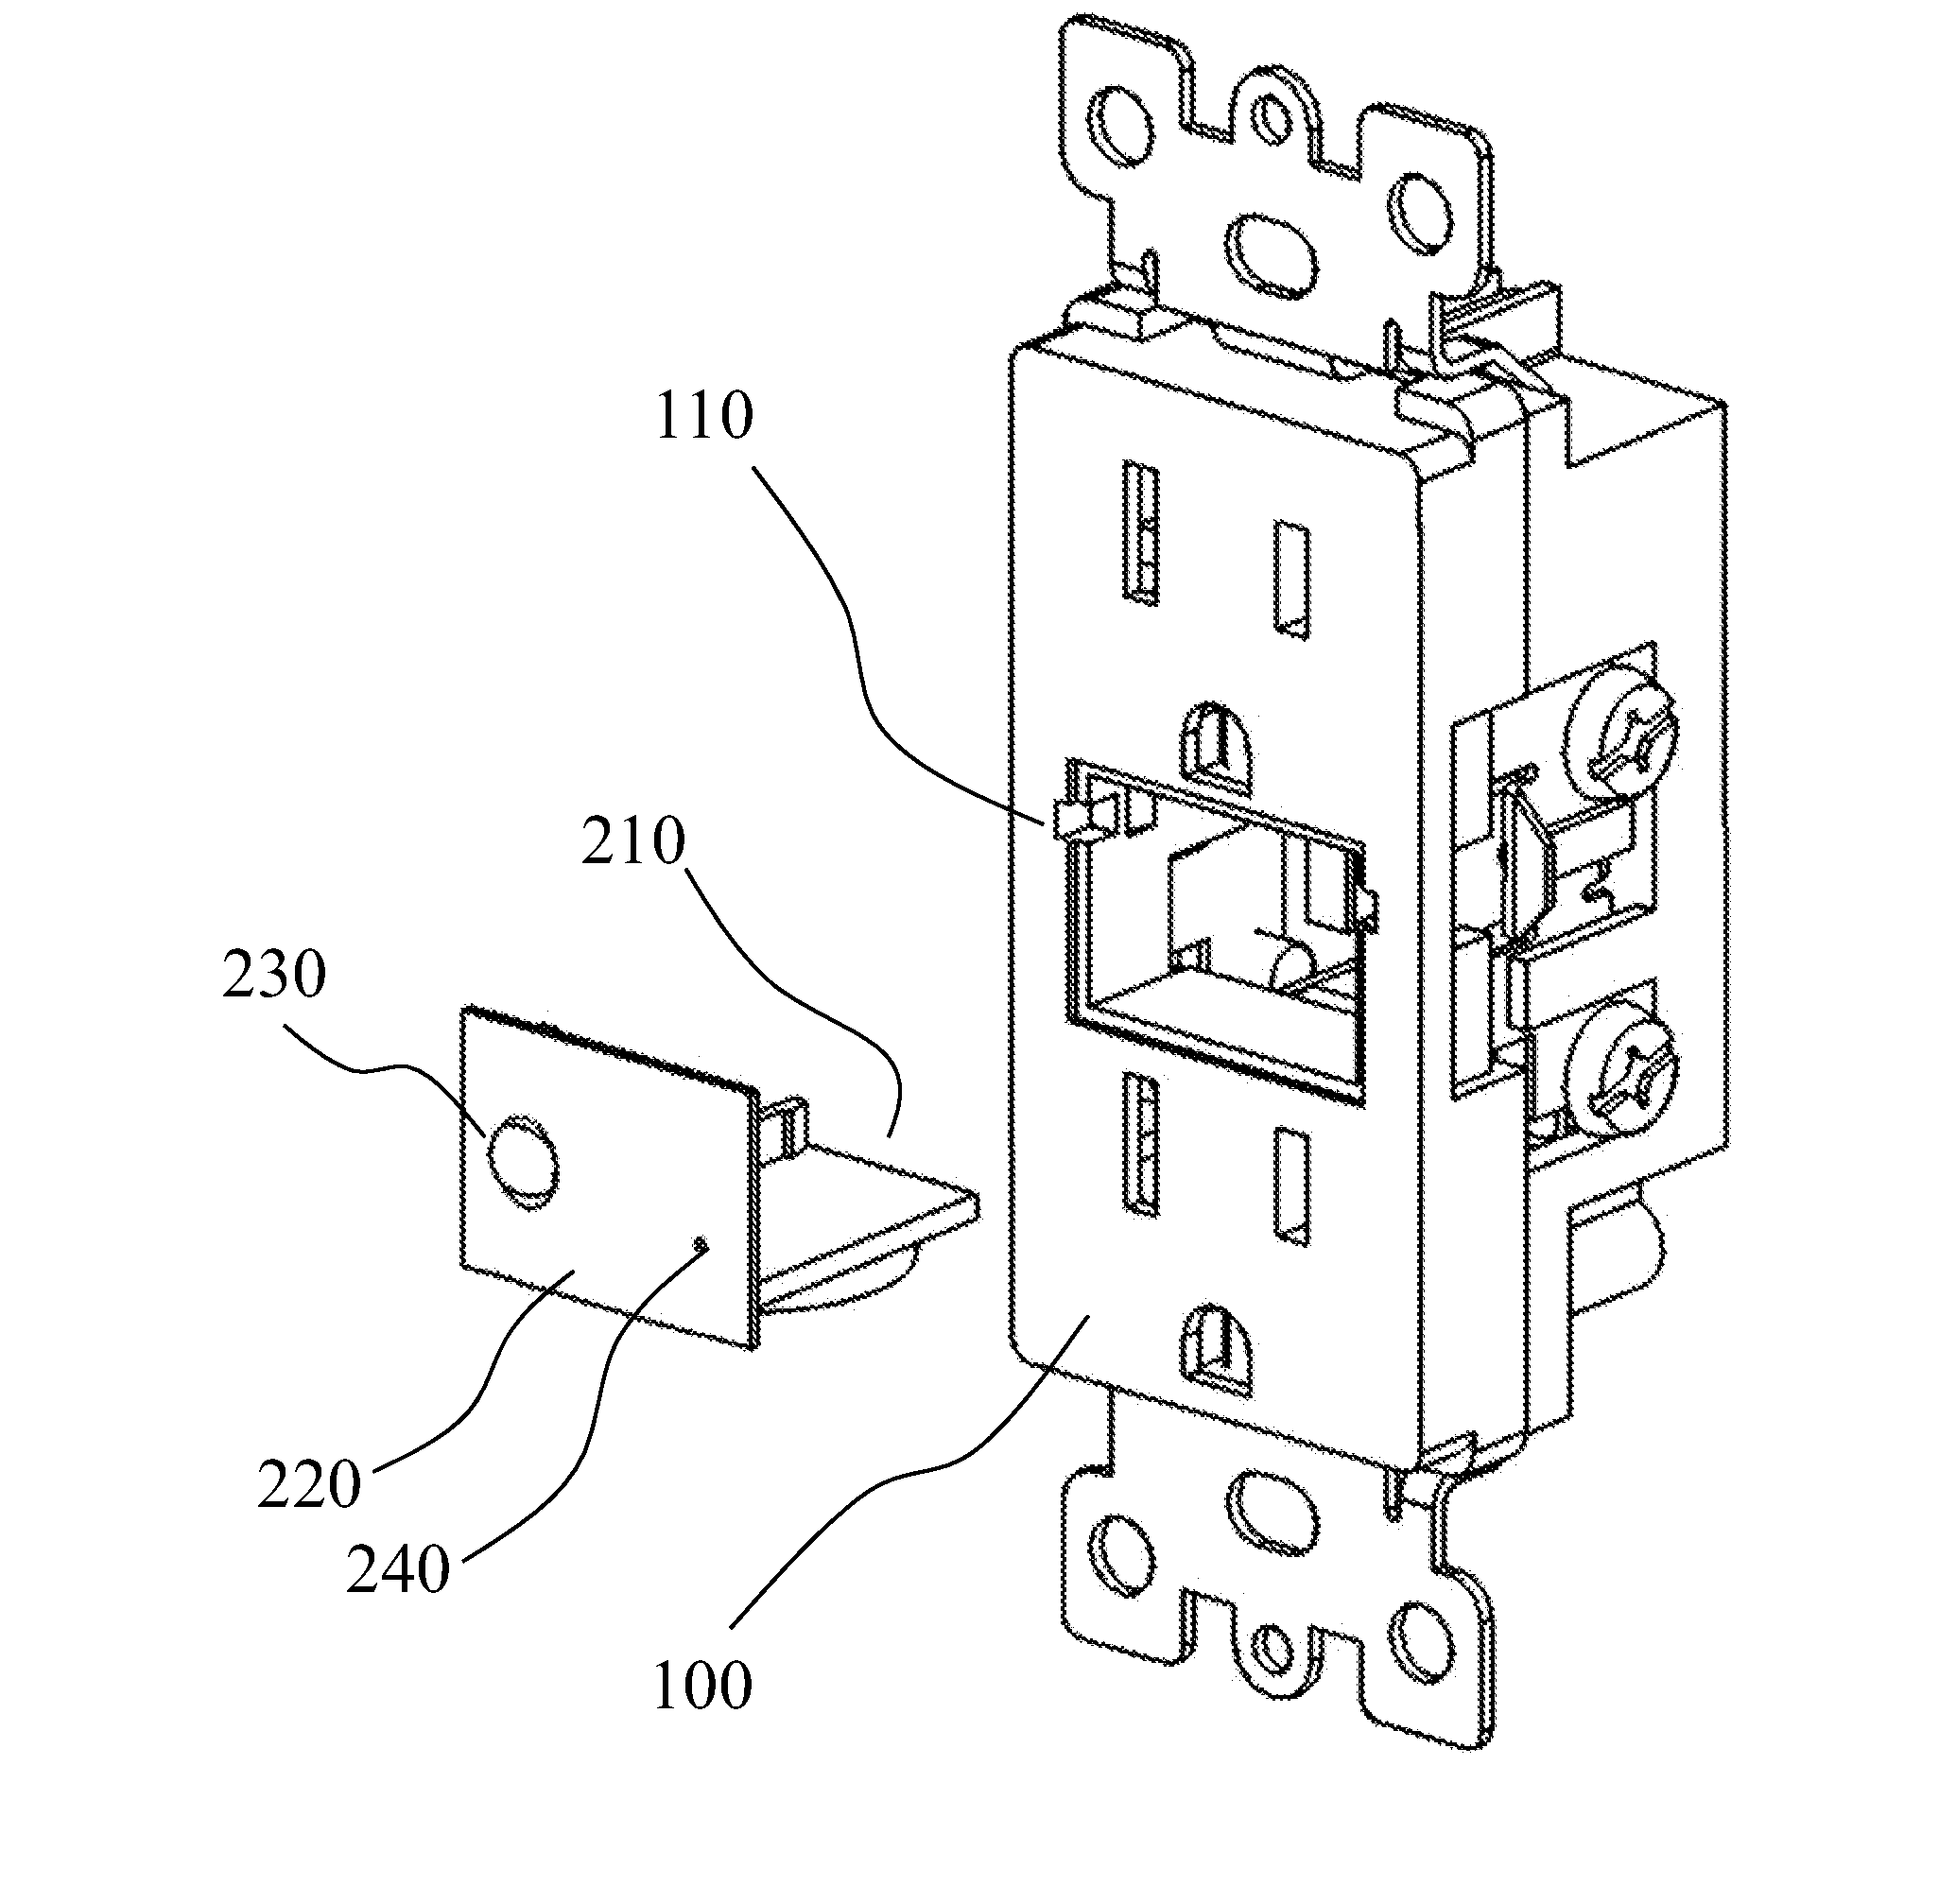 Configurable safety light receptacle